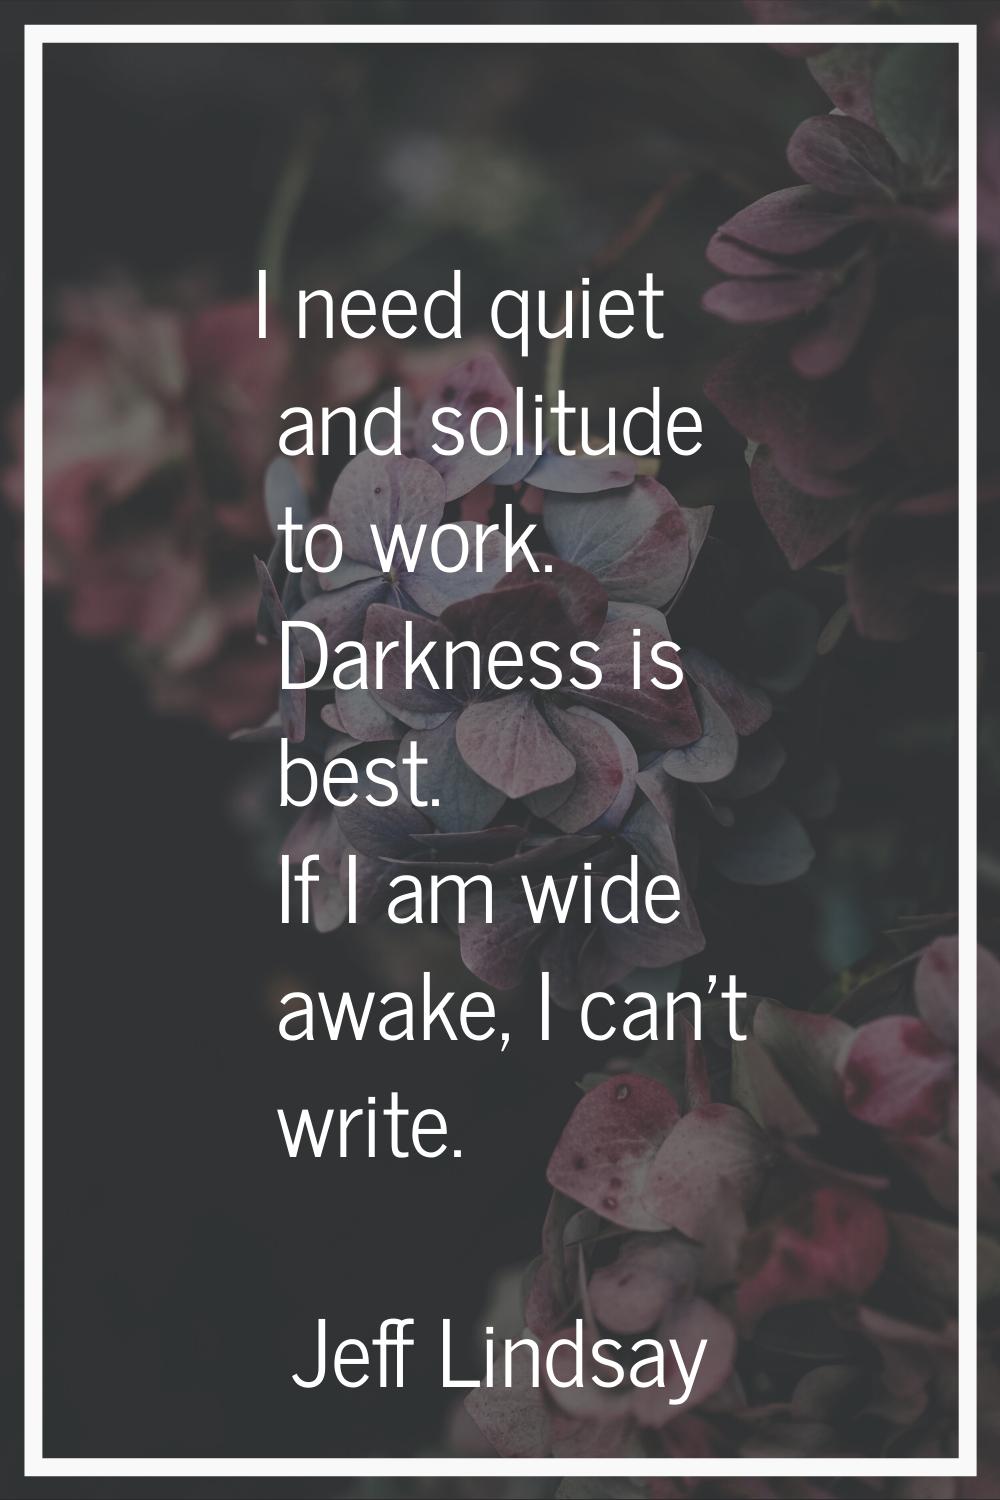 I need quiet and solitude to work. Darkness is best. If I am wide awake, I can't write.